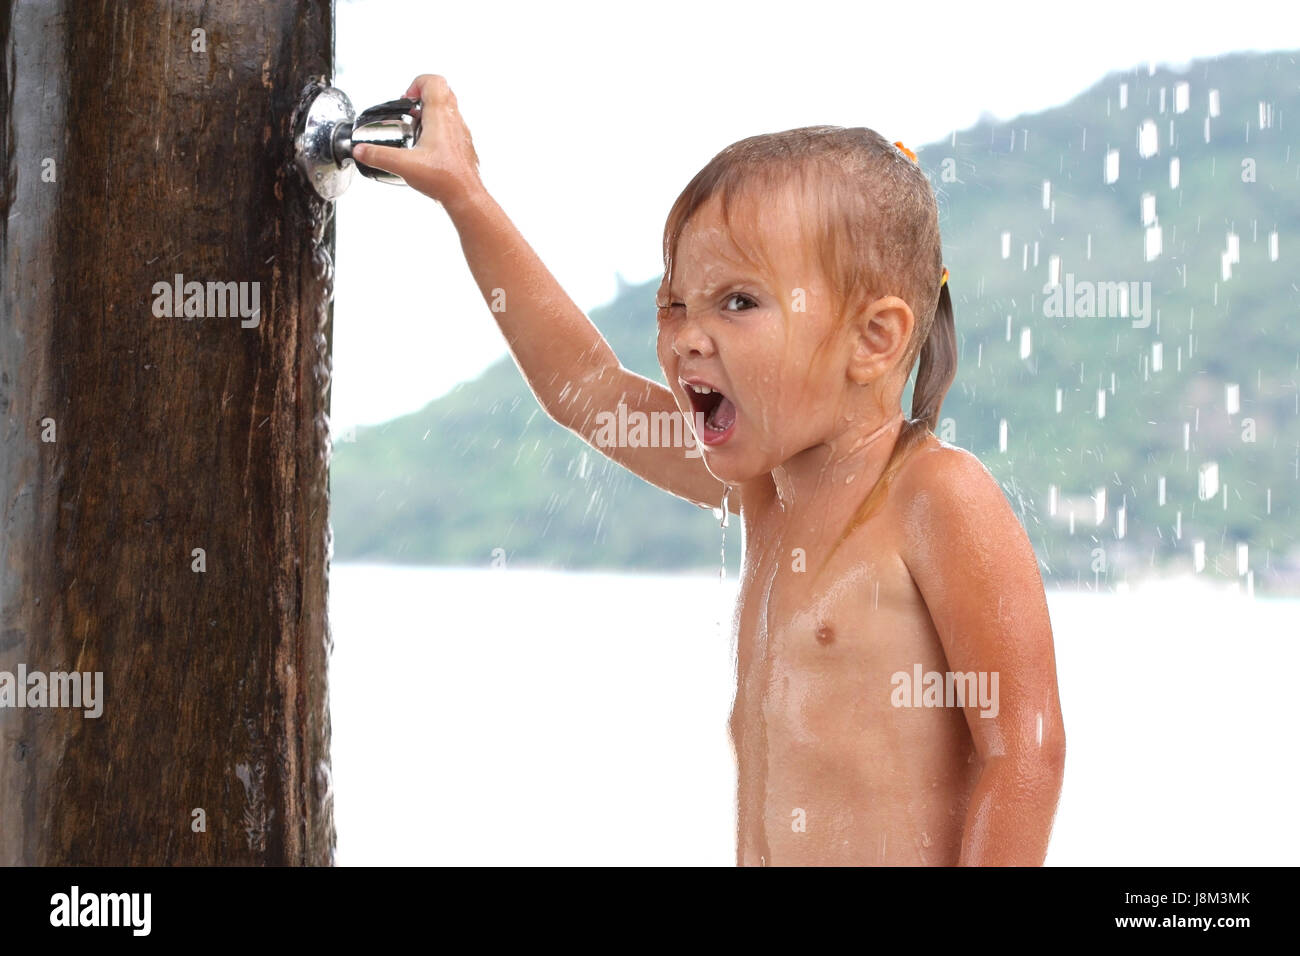 emotions, face, small, tiny, little, short, baby, shower, child, douche,  girl Stock Photo - Alamy